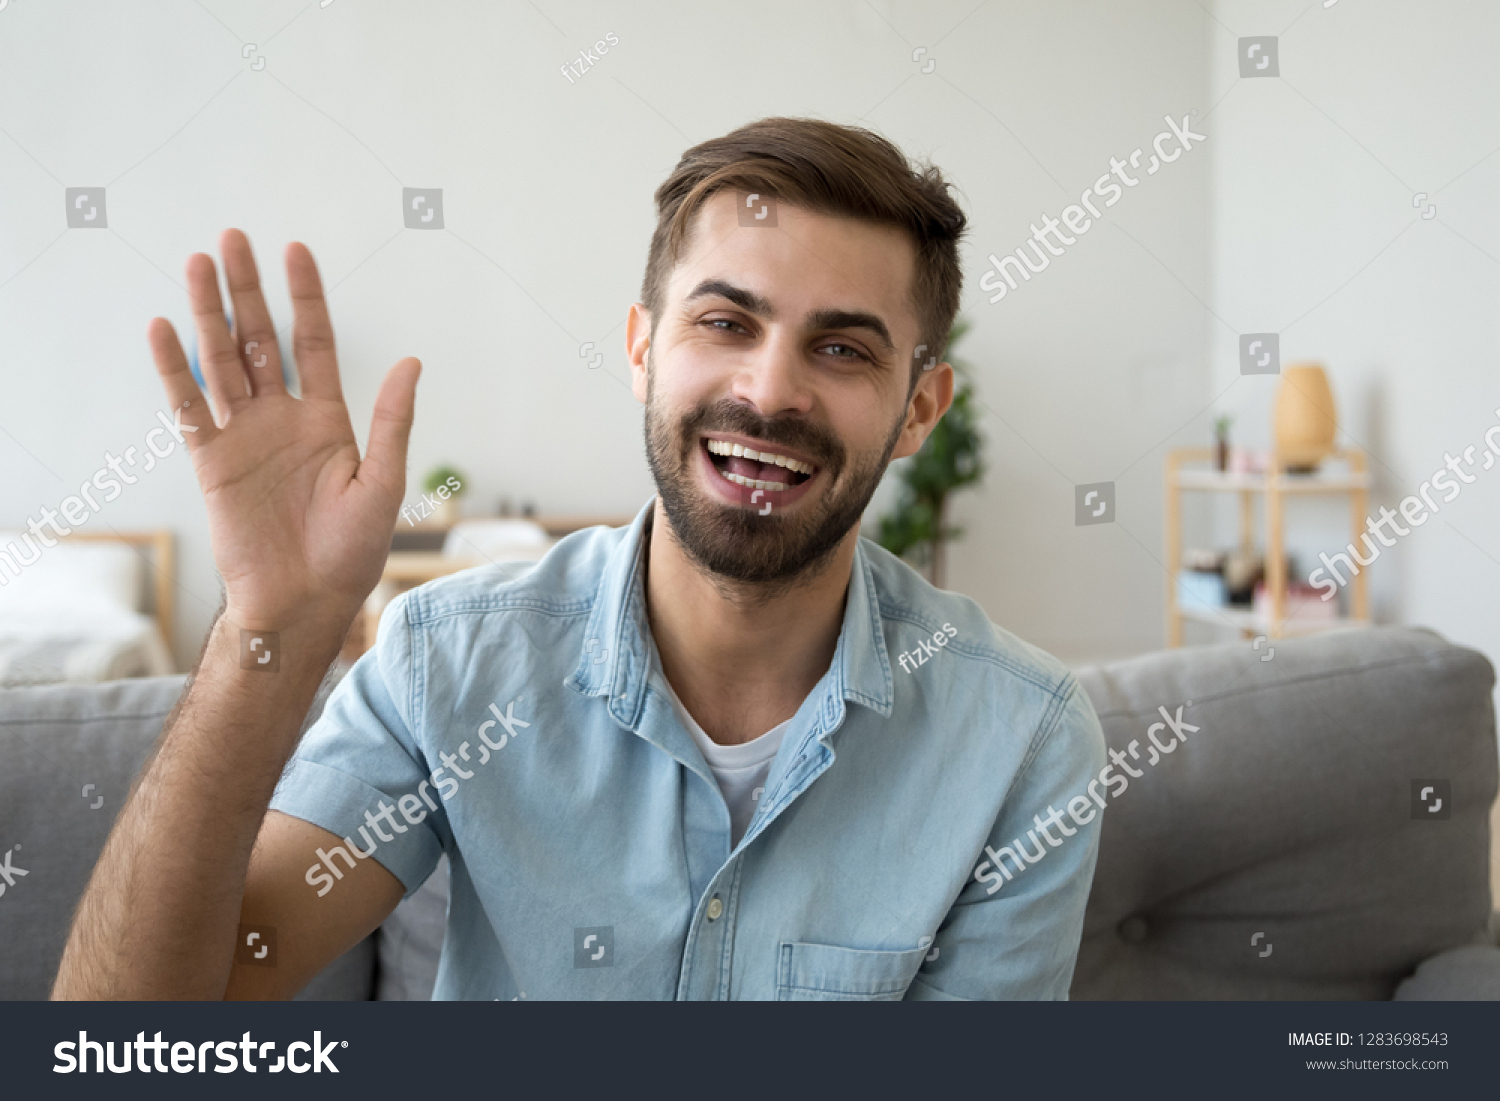 Friendly happy young man waving hand saying hello looking at camera greeting distant friend making online call, cheerful male vlogger blogger recording vlog teaching e-coaching via webcam, portrait #1283698543